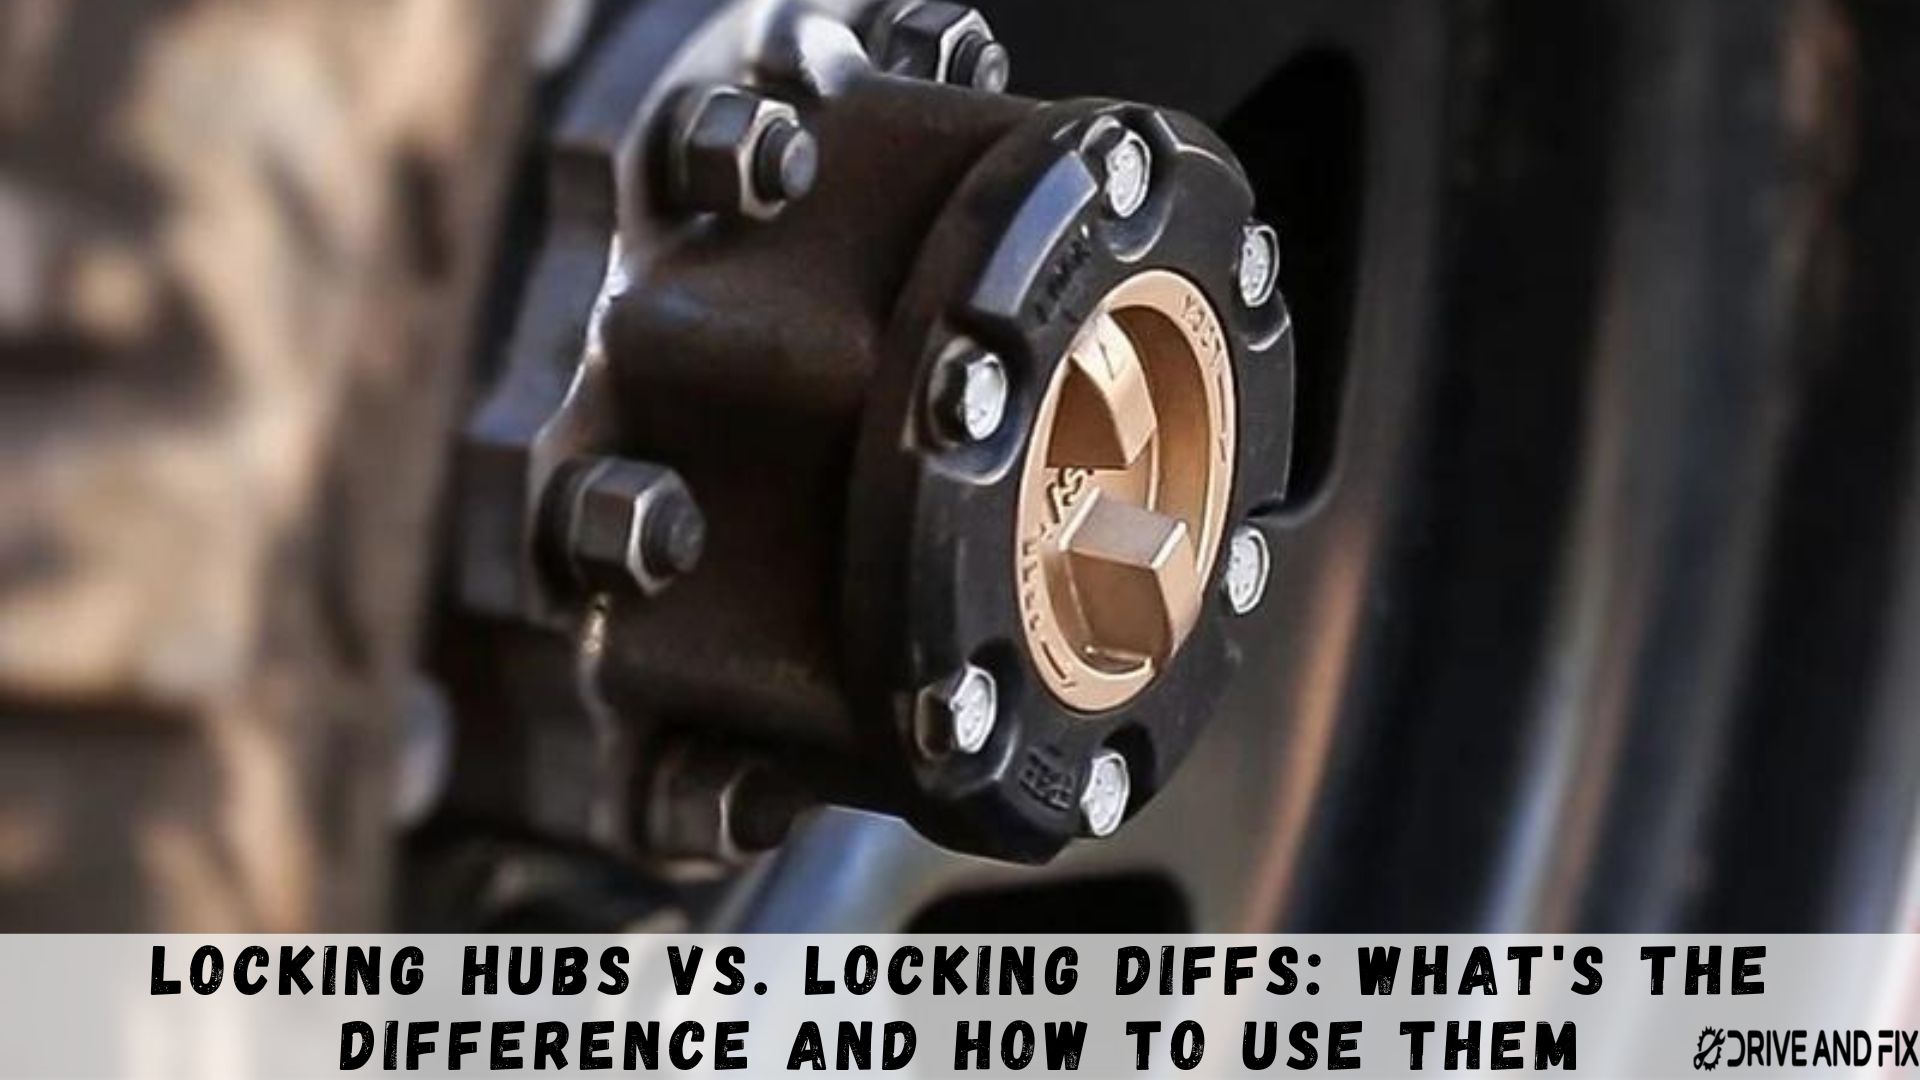 Locking Hubs vs. Locking Diffs What's the Difference and How to Use Them